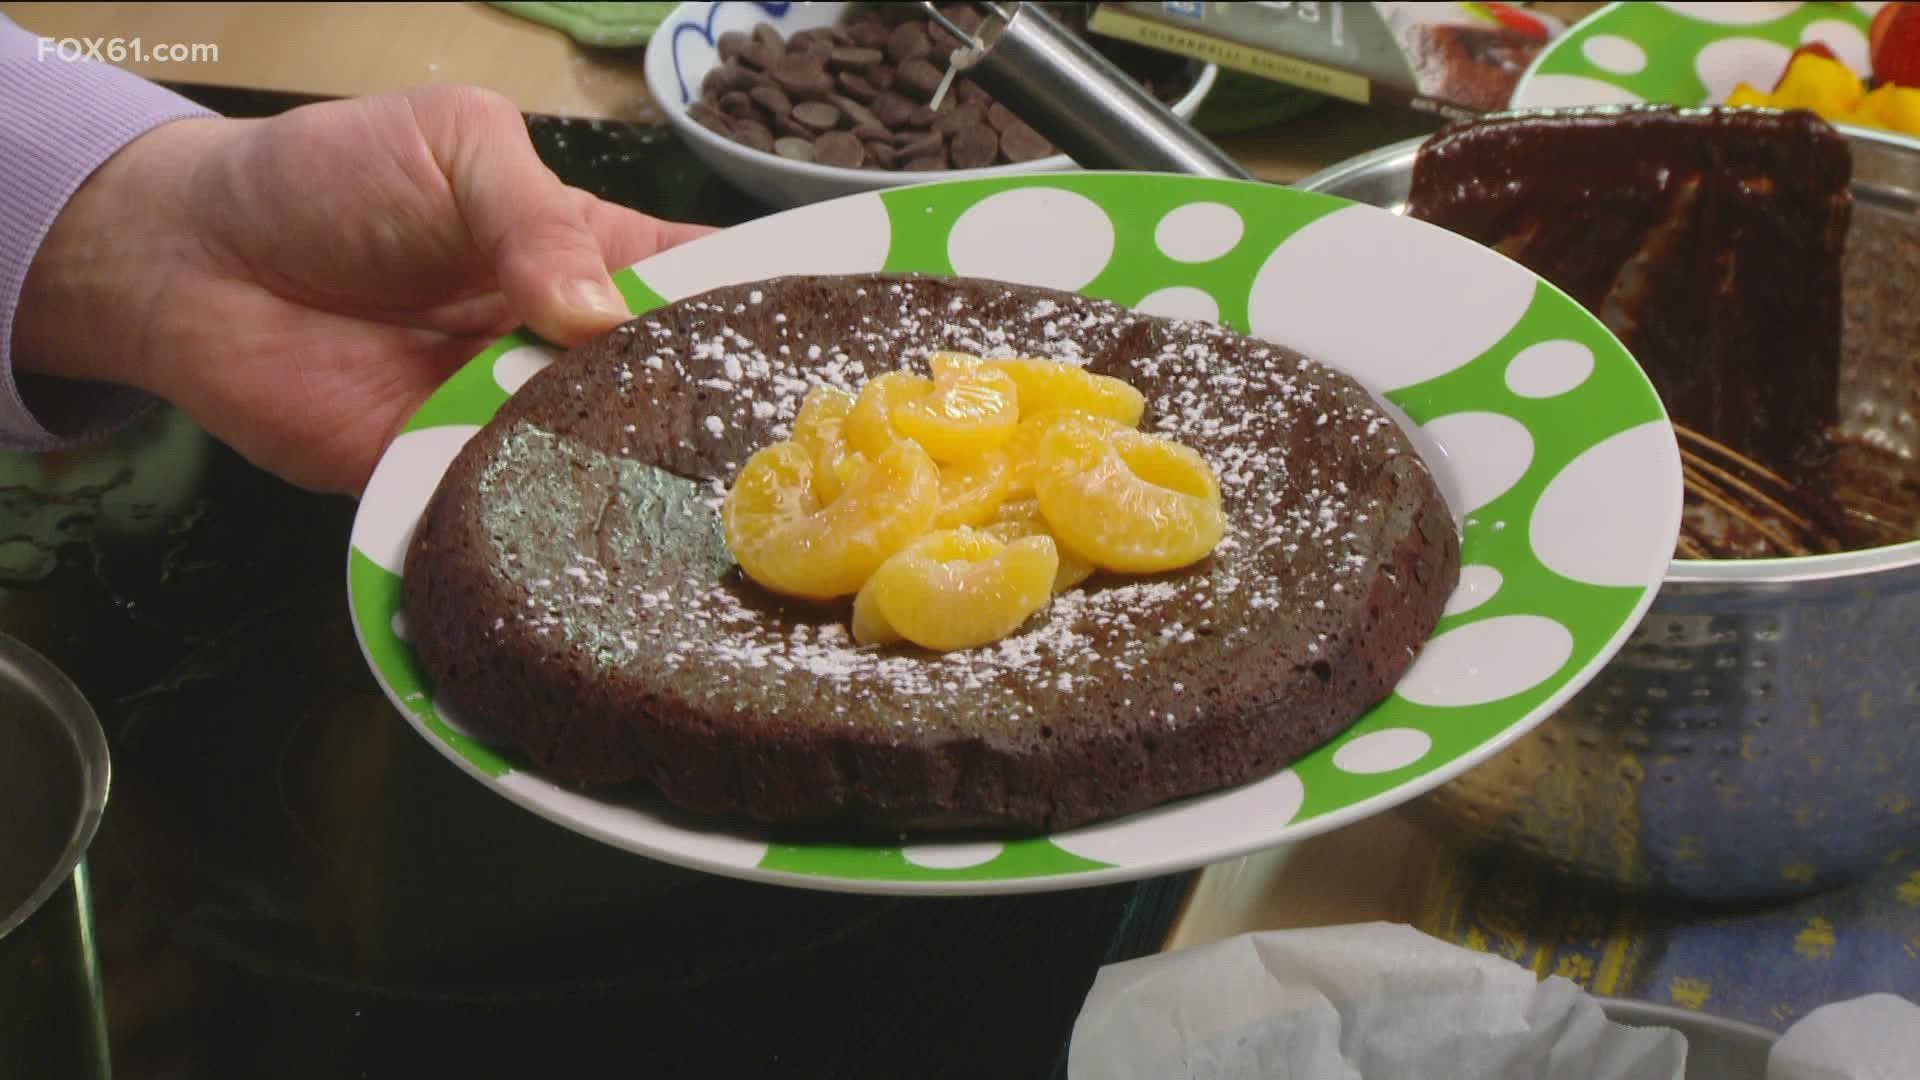 Ani's Table shares its recipe for chocolate cake, no flour needed! There's also the option to add espresso for a mocha taste.